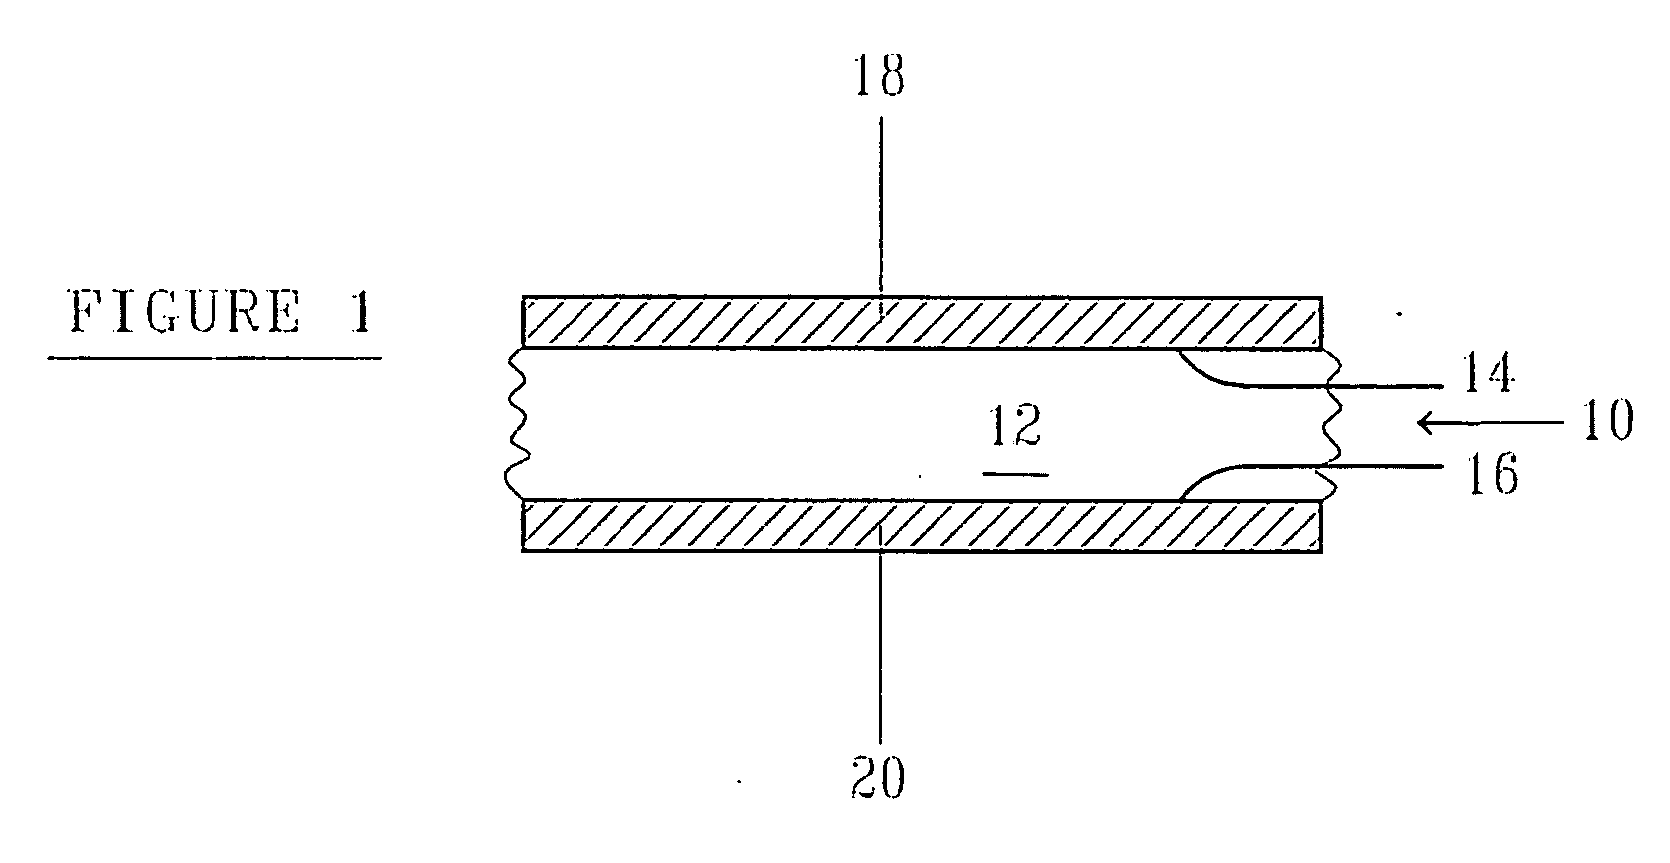 Novel electrodes and uses thereof